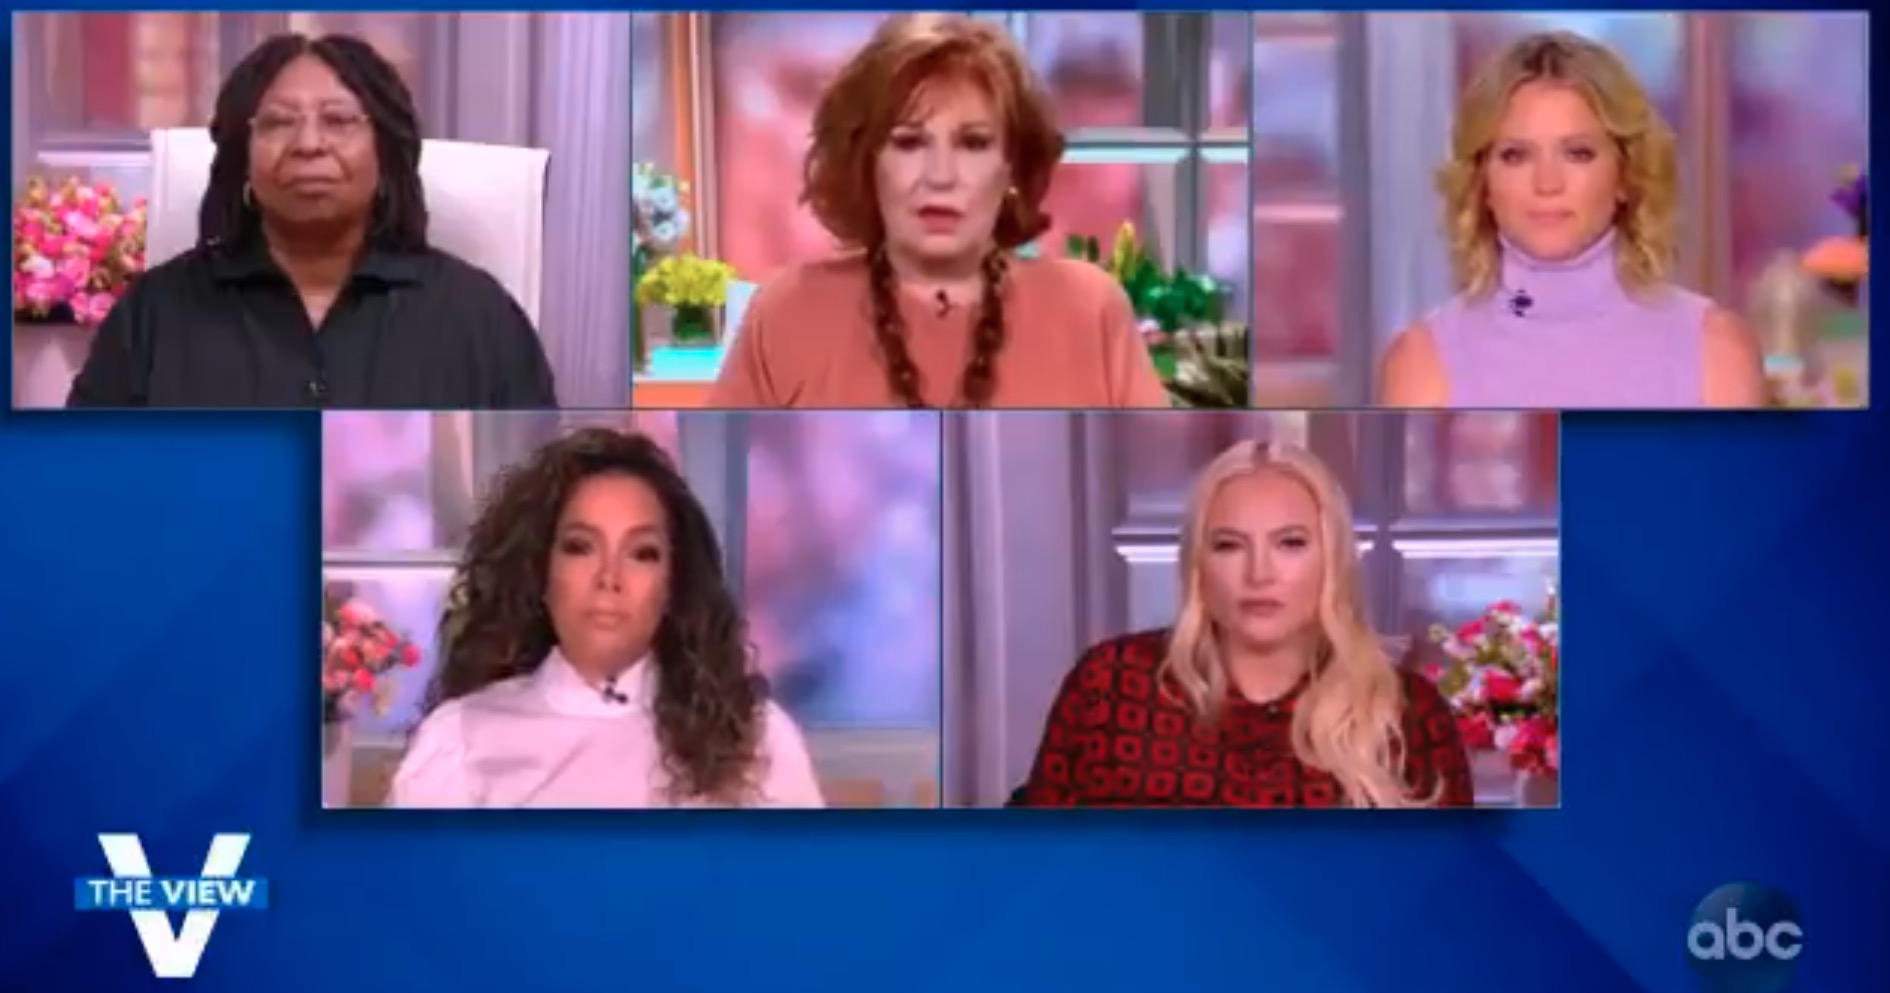 The hosts of the View in split screens